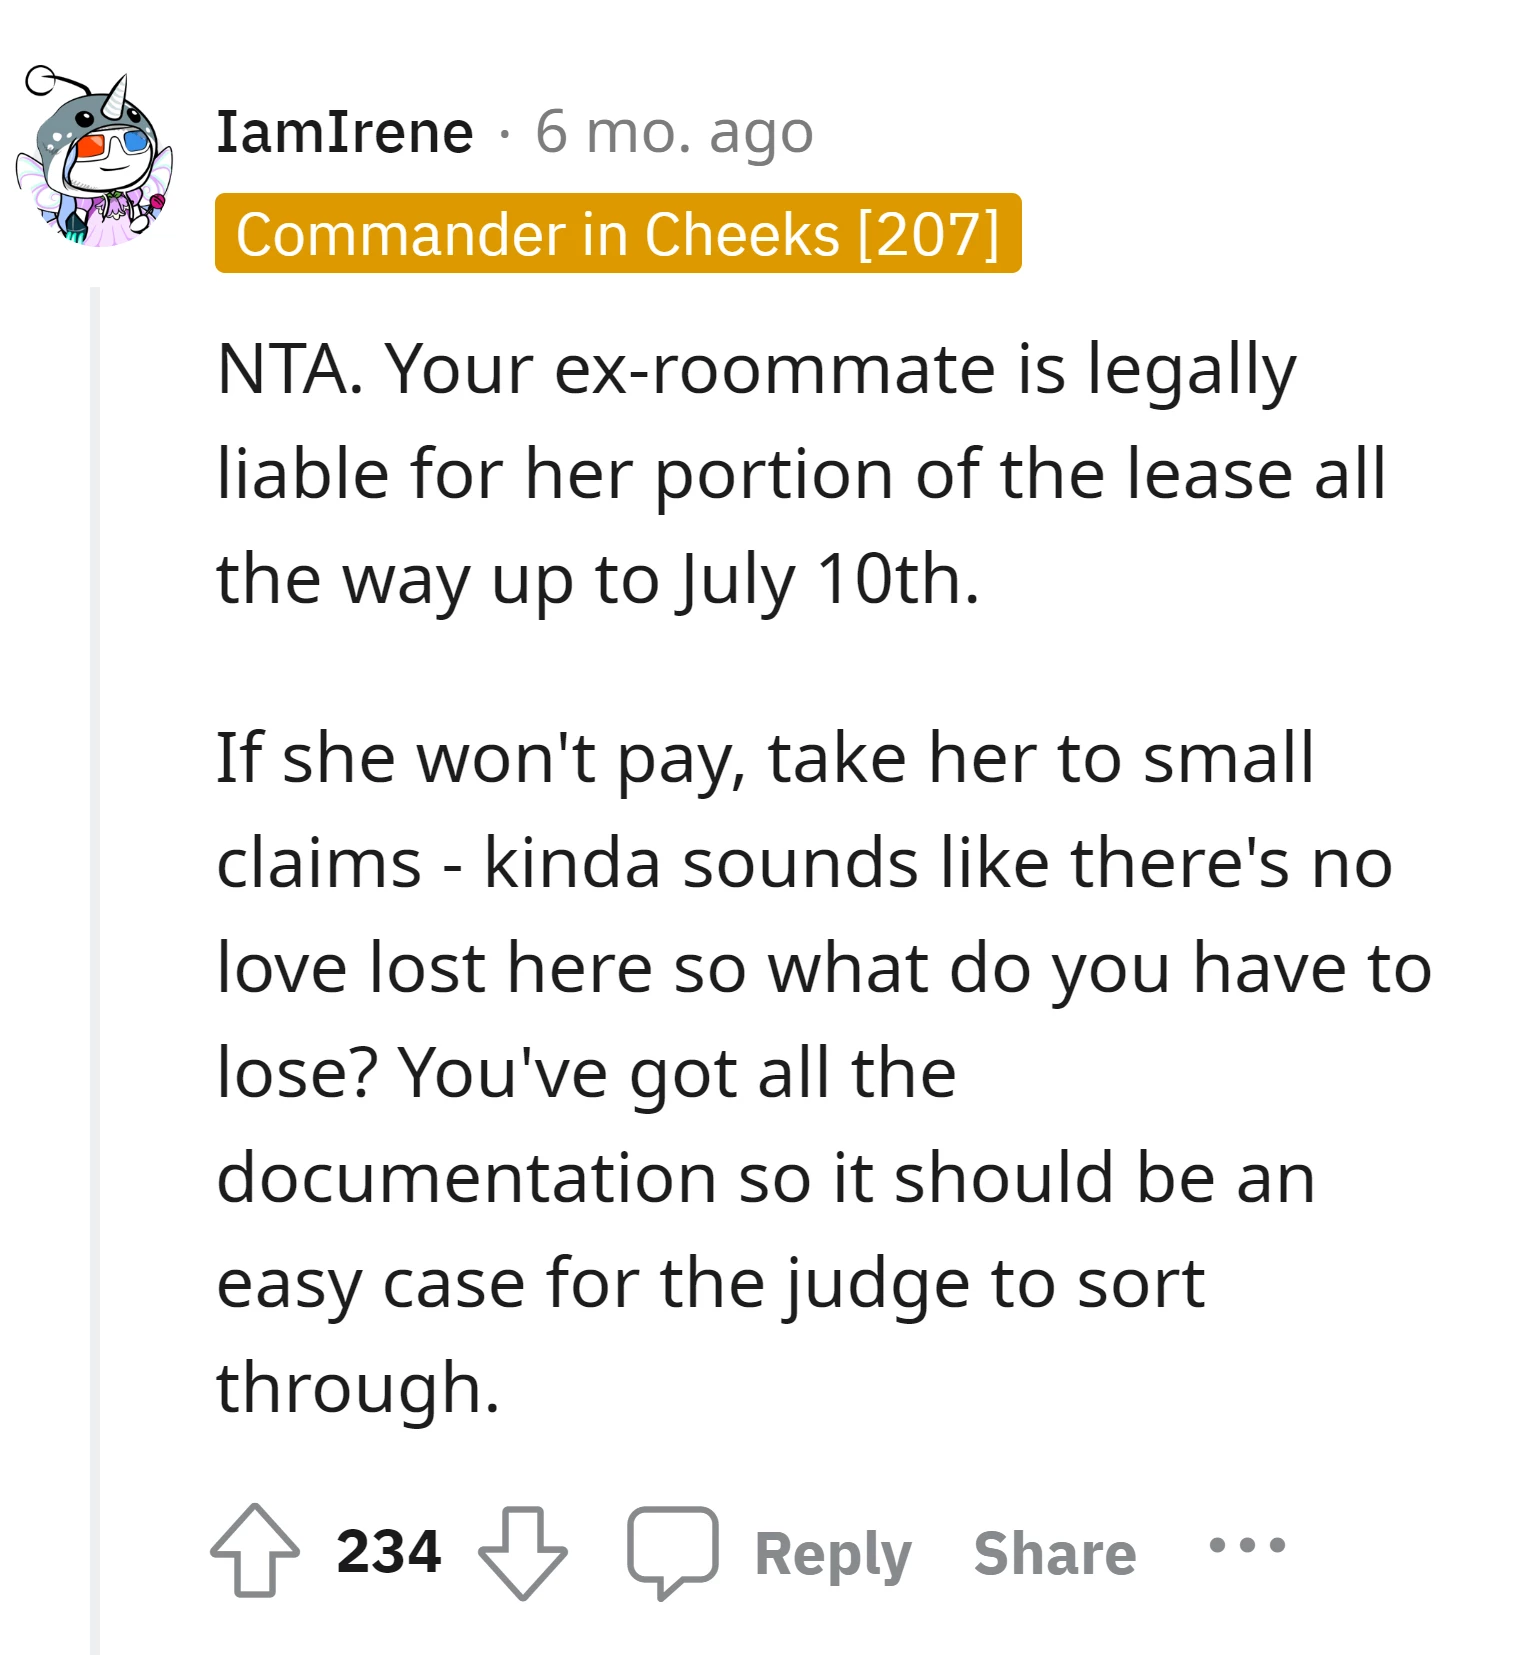 The ex-roommate is legally responsible for rent